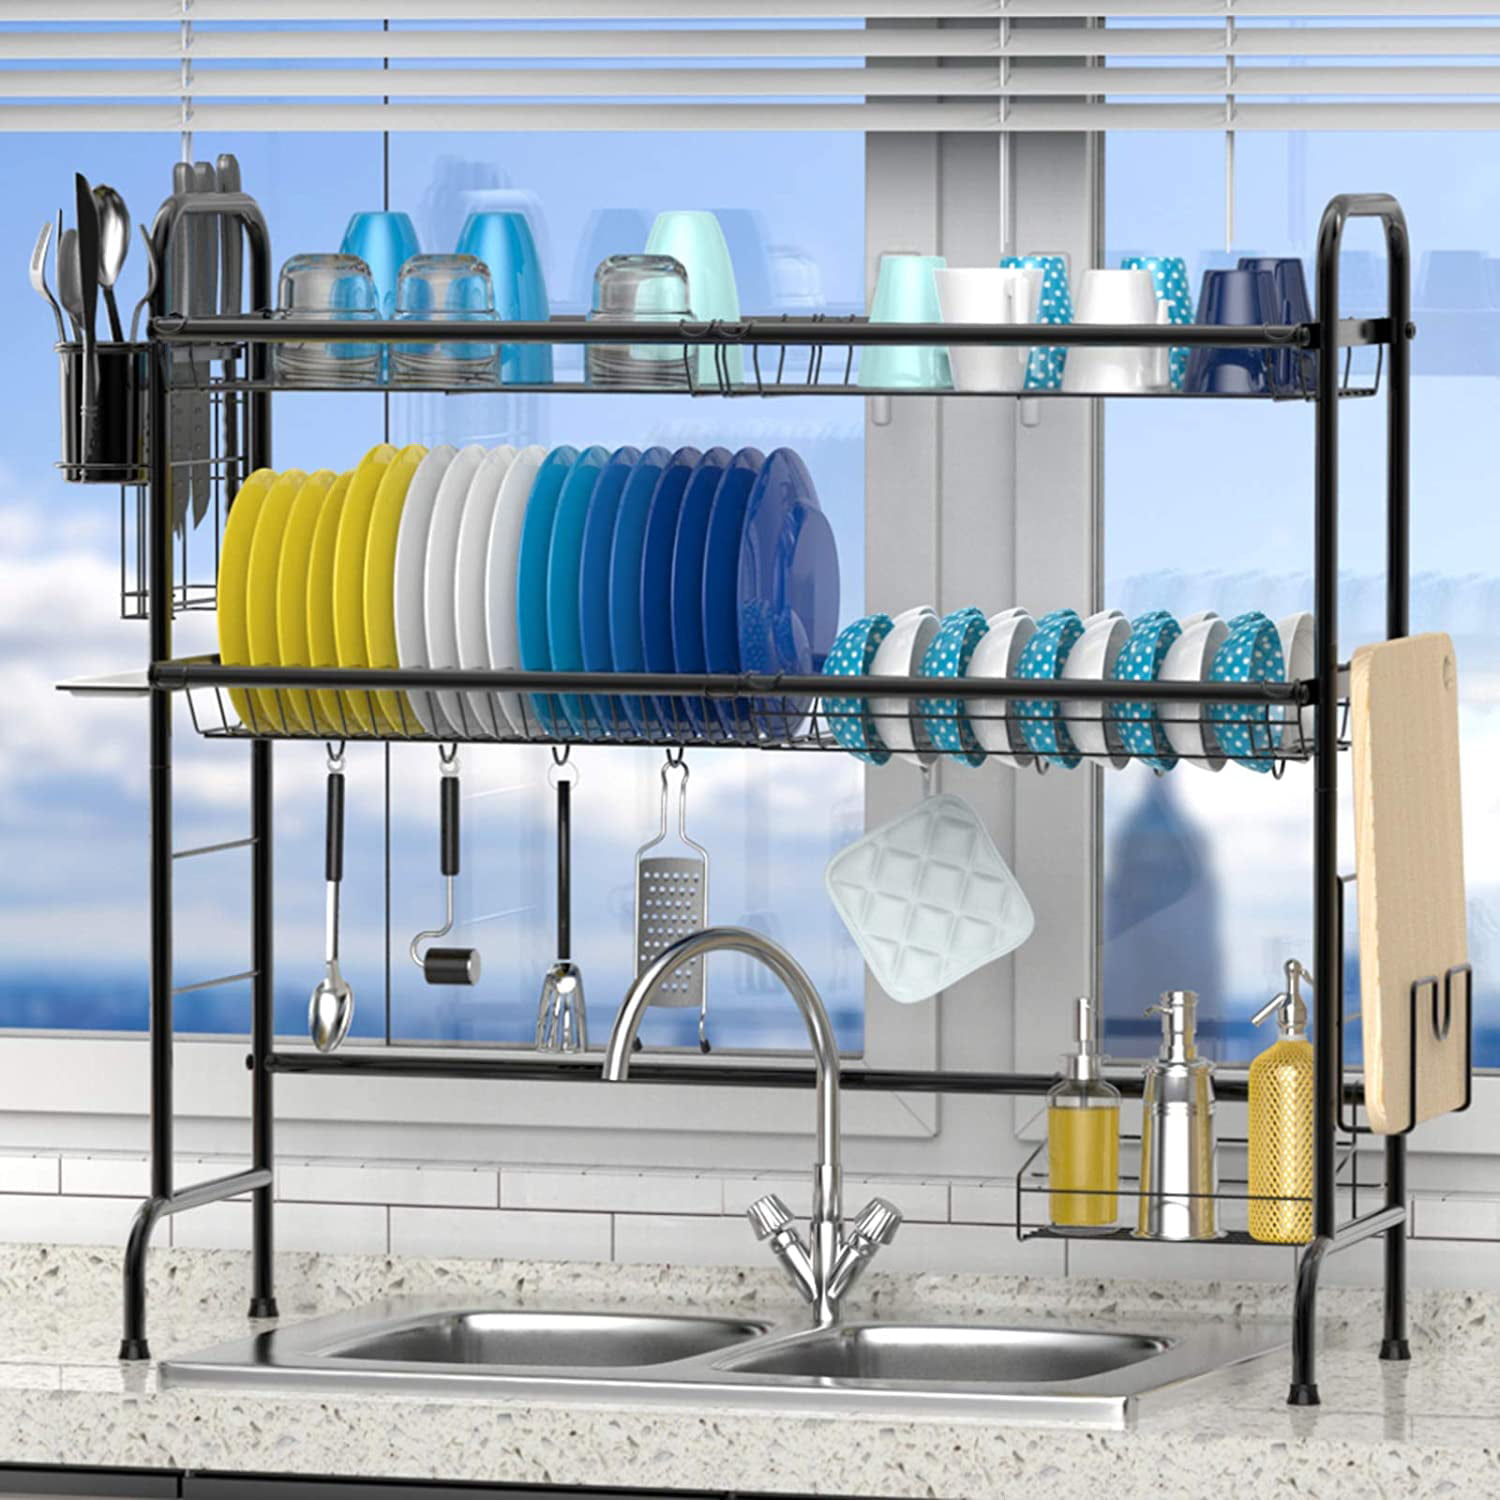 iSPECLE 2-Tier Large 201 Stainless Steel Dish Rack with Utensil Holder Hooks Stable Bend Foot for Kitchen Counter Non-Slip Over the Sink Dish Drying Rack